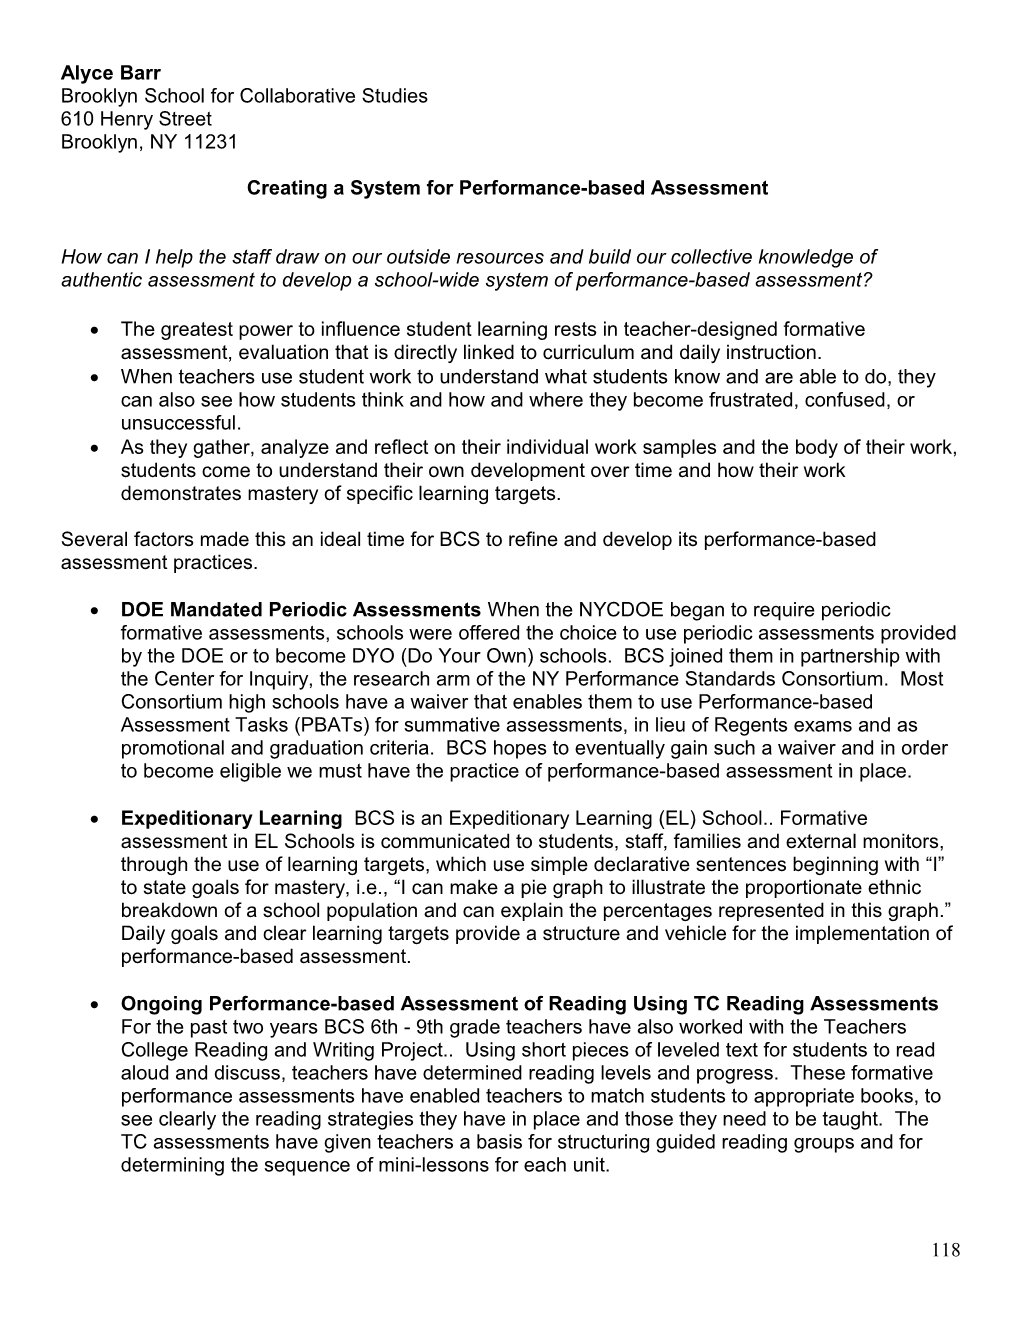 Creating a System for Performance-Based Assessment